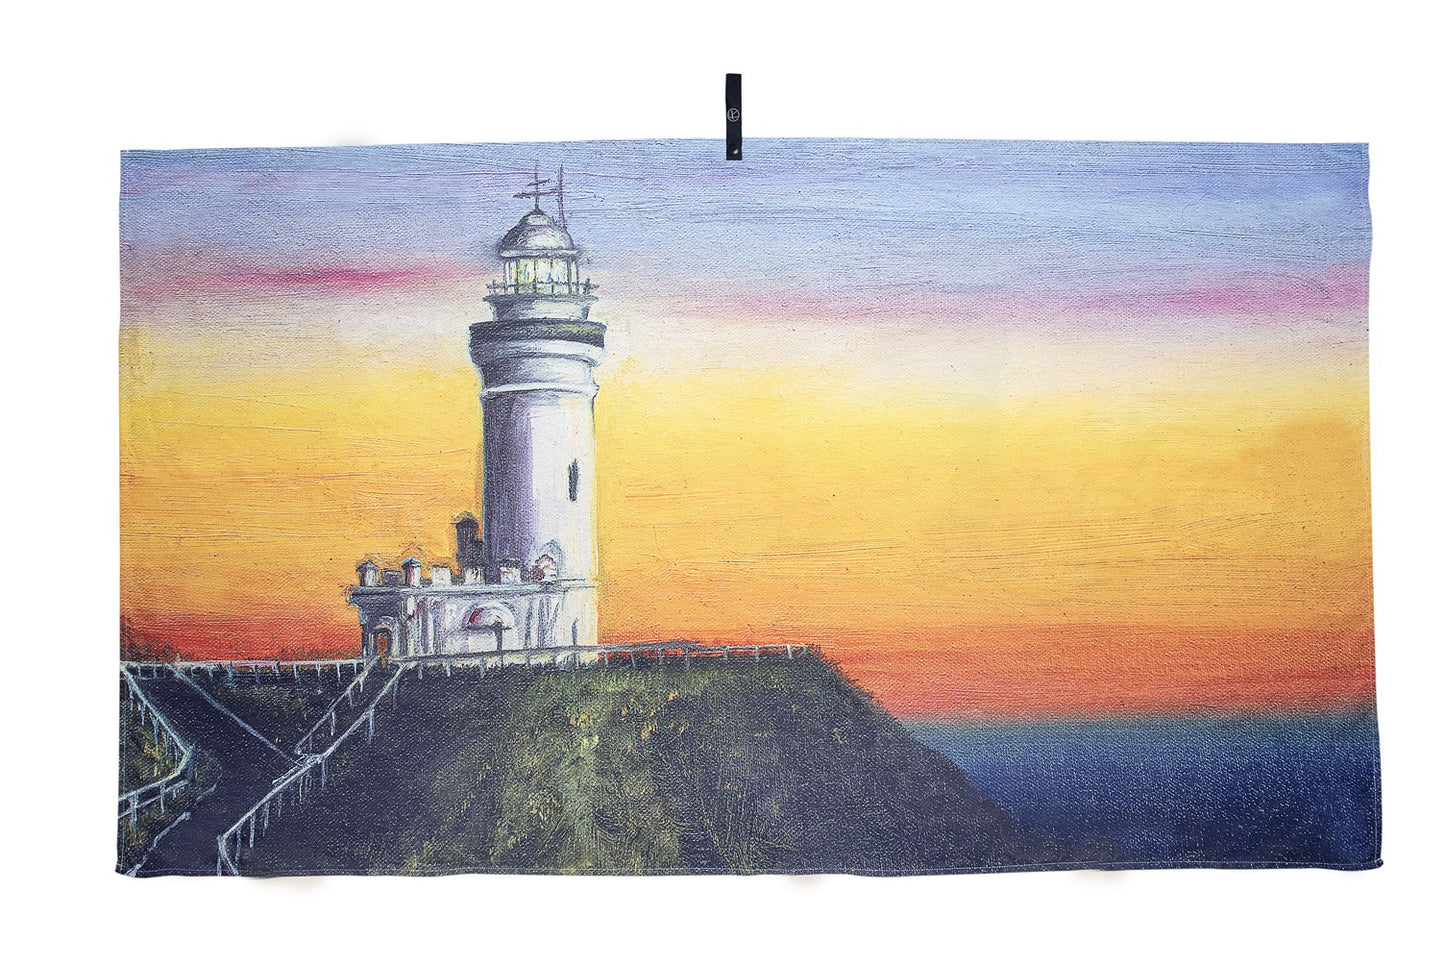 Byron Bay microfibre artistic towel. The towel shows Byron Bay’s famous Cape Byron Lighthouse on top of the cliff with its otherworldly Pacific Ocean view intense sunset yellow, pinkish and blue colors. An art inspired by the Byron’s unique atmosphere of nature and well-being. Large size, 170cm x 95cm, soft touch, compact and sand free beach towel. An Aussie-inspired art showcasing magnificent landmarks and the Aussie lifestyle.